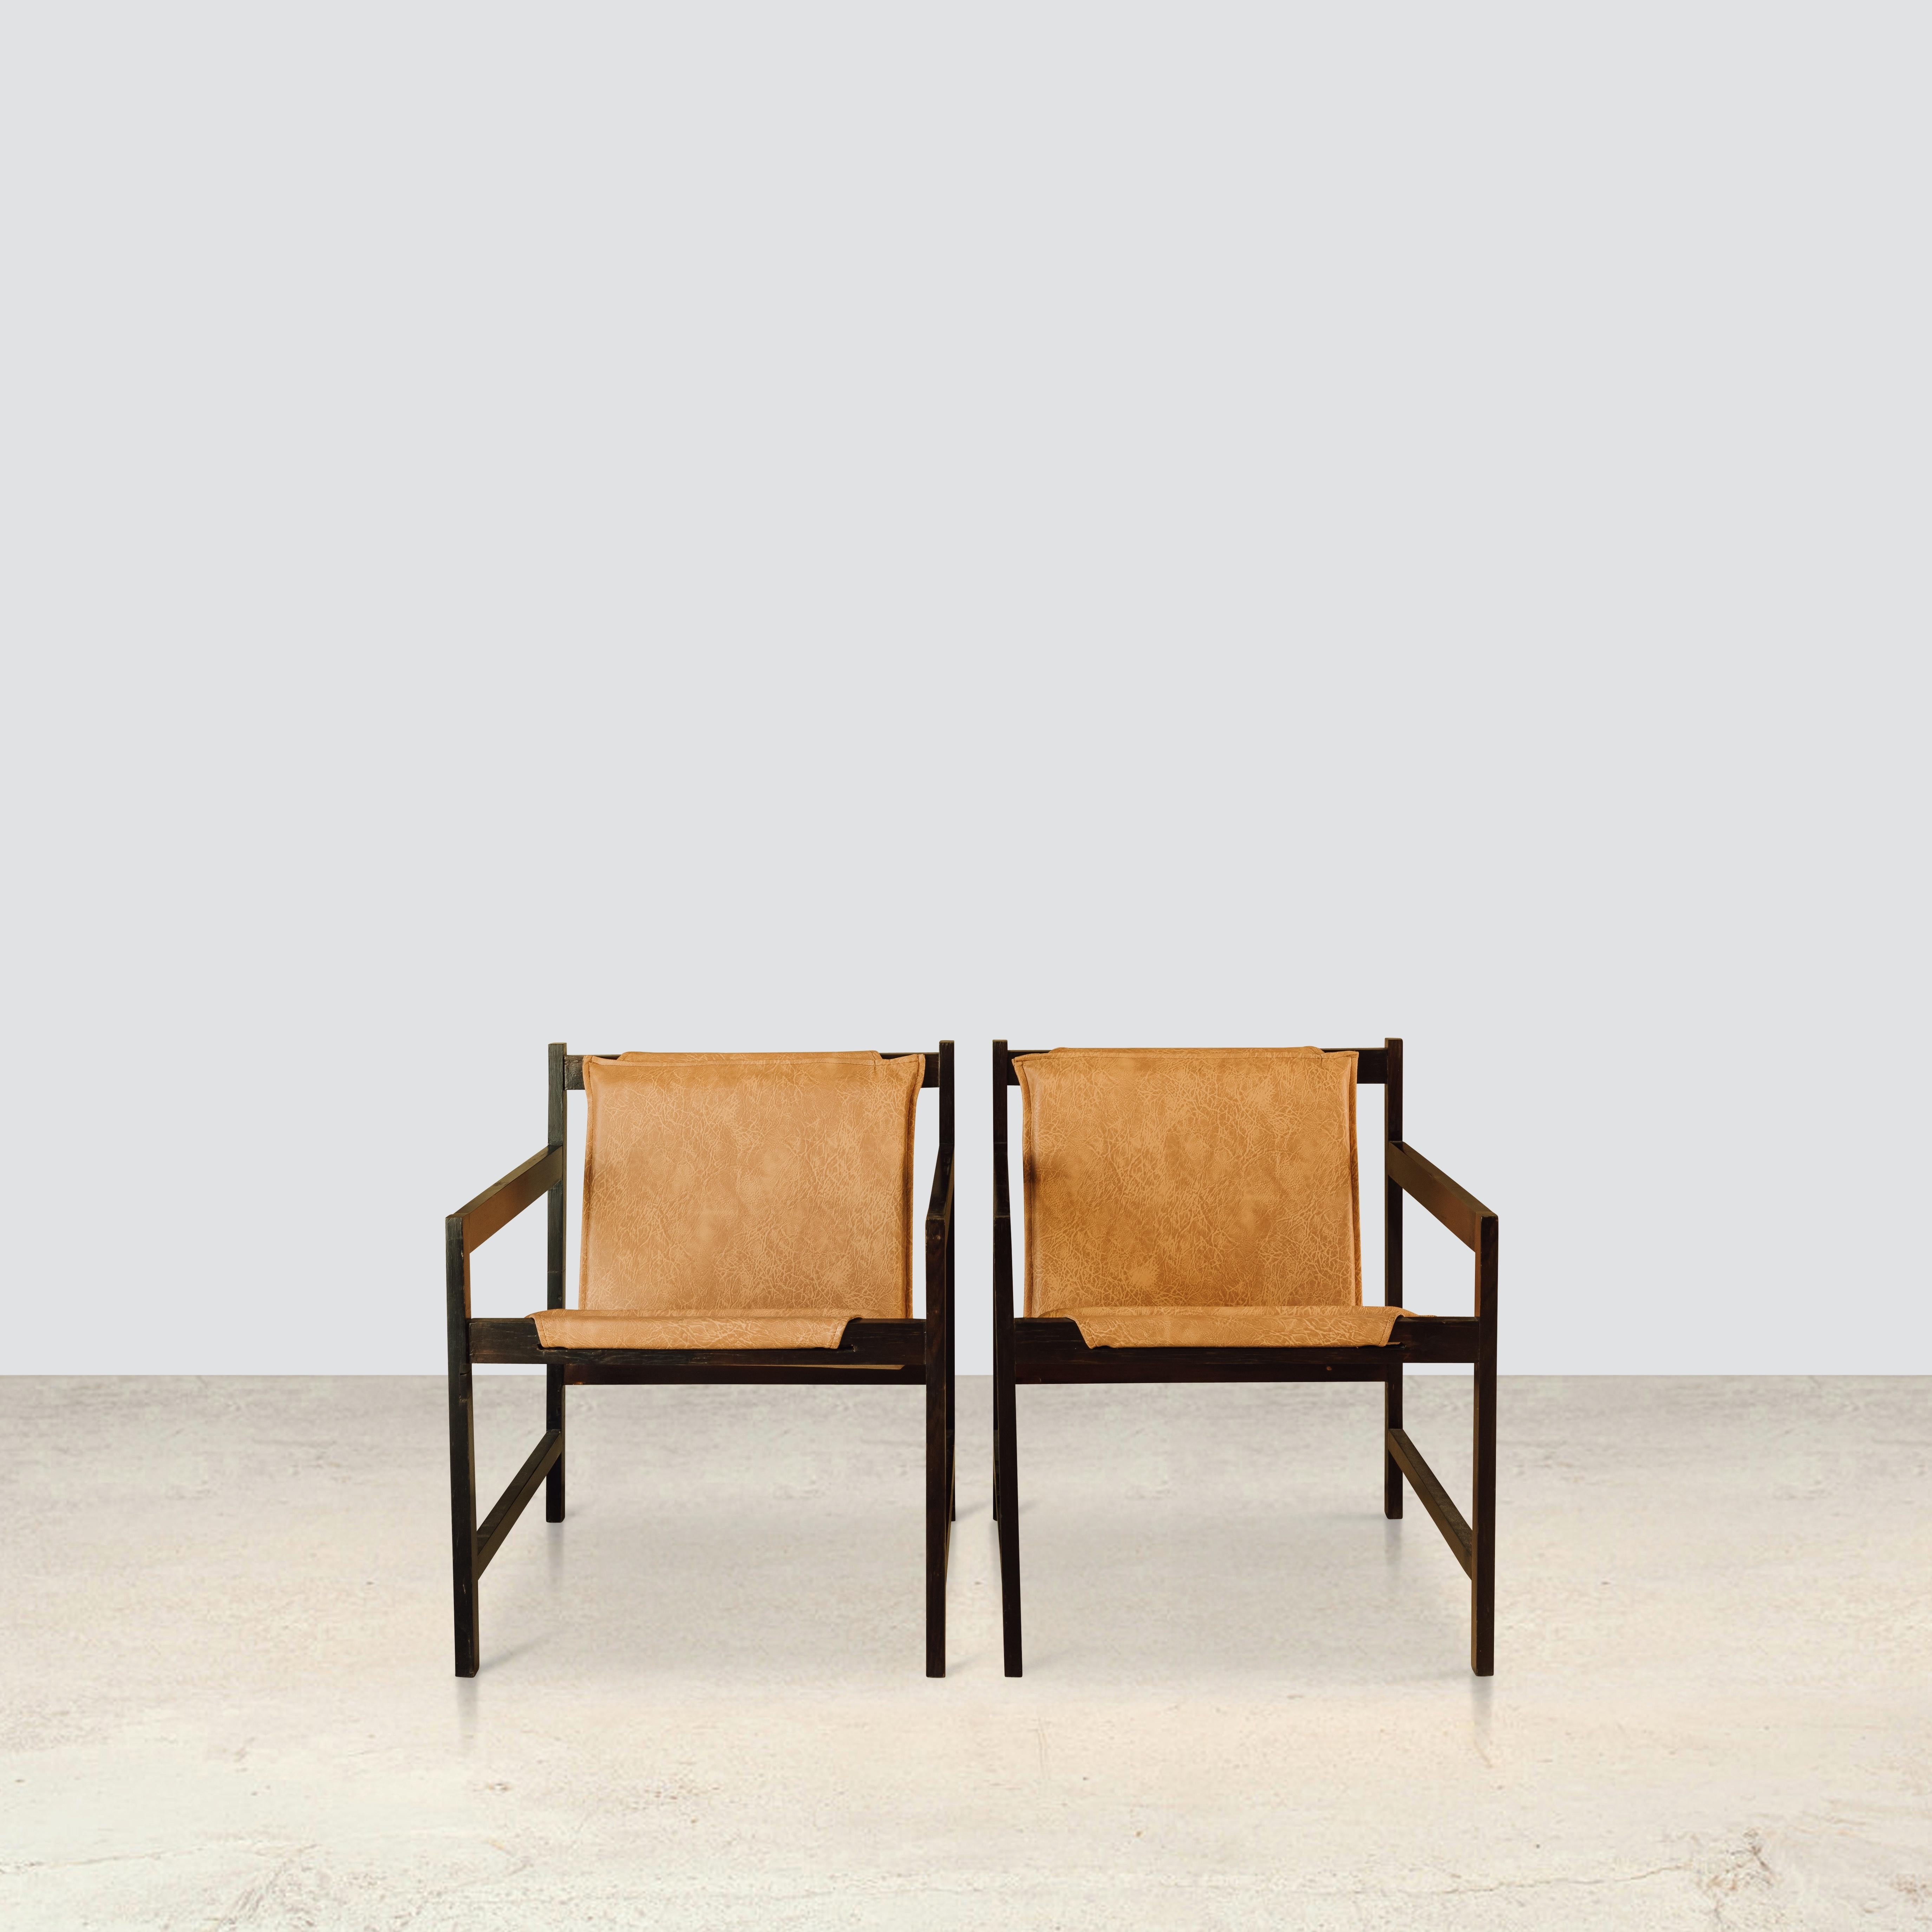 Lia armchair 
By Sergio Rodrigues 1962

Pair of Sergio Rodrigues Lia chairs from the 1960s made of Brazilian rosewood and upholstered in beige cowhide. 

Provenace
Private collection Sao Paulo

Litterature
P 149 of Sérgio Rodrigues’ book -